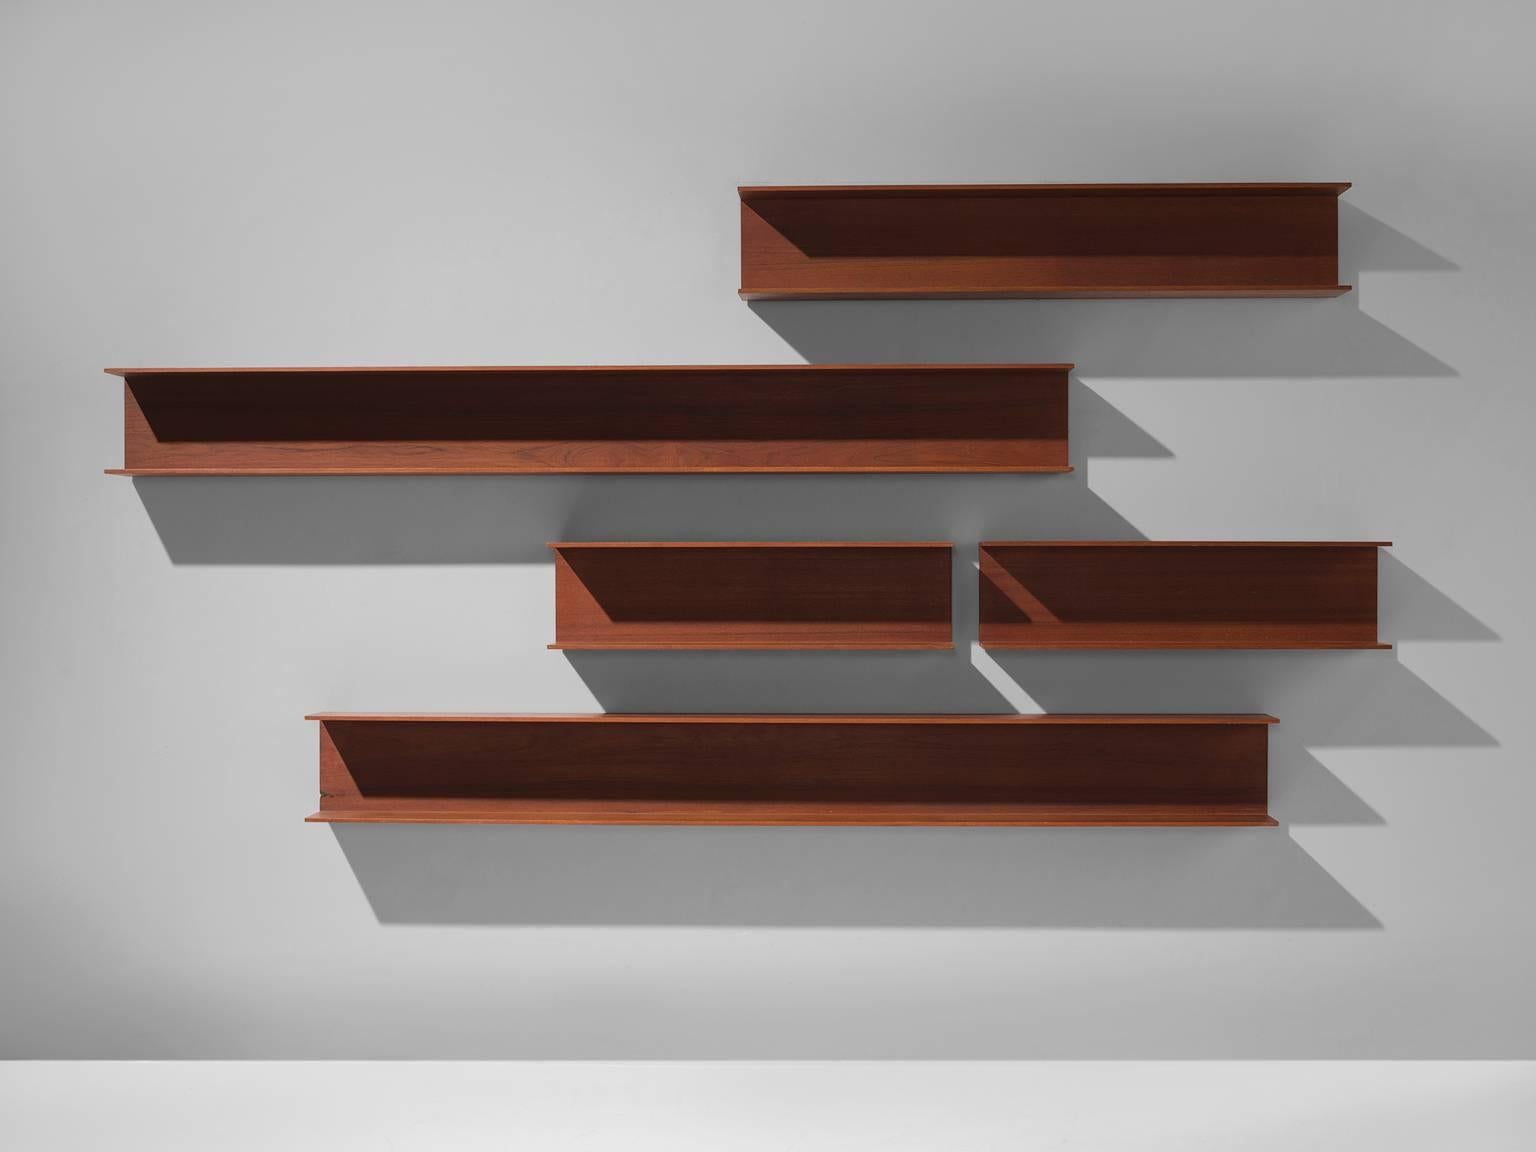 Walter Wirz for Wilhelm Renz, wall shelves, teak, Germany, design 1965, production 1960s

This solid teak wall shelf is designed by Walter Wirz for the German company Wilhelm Renz and is part of the midcentury design collection. The shelf, by now